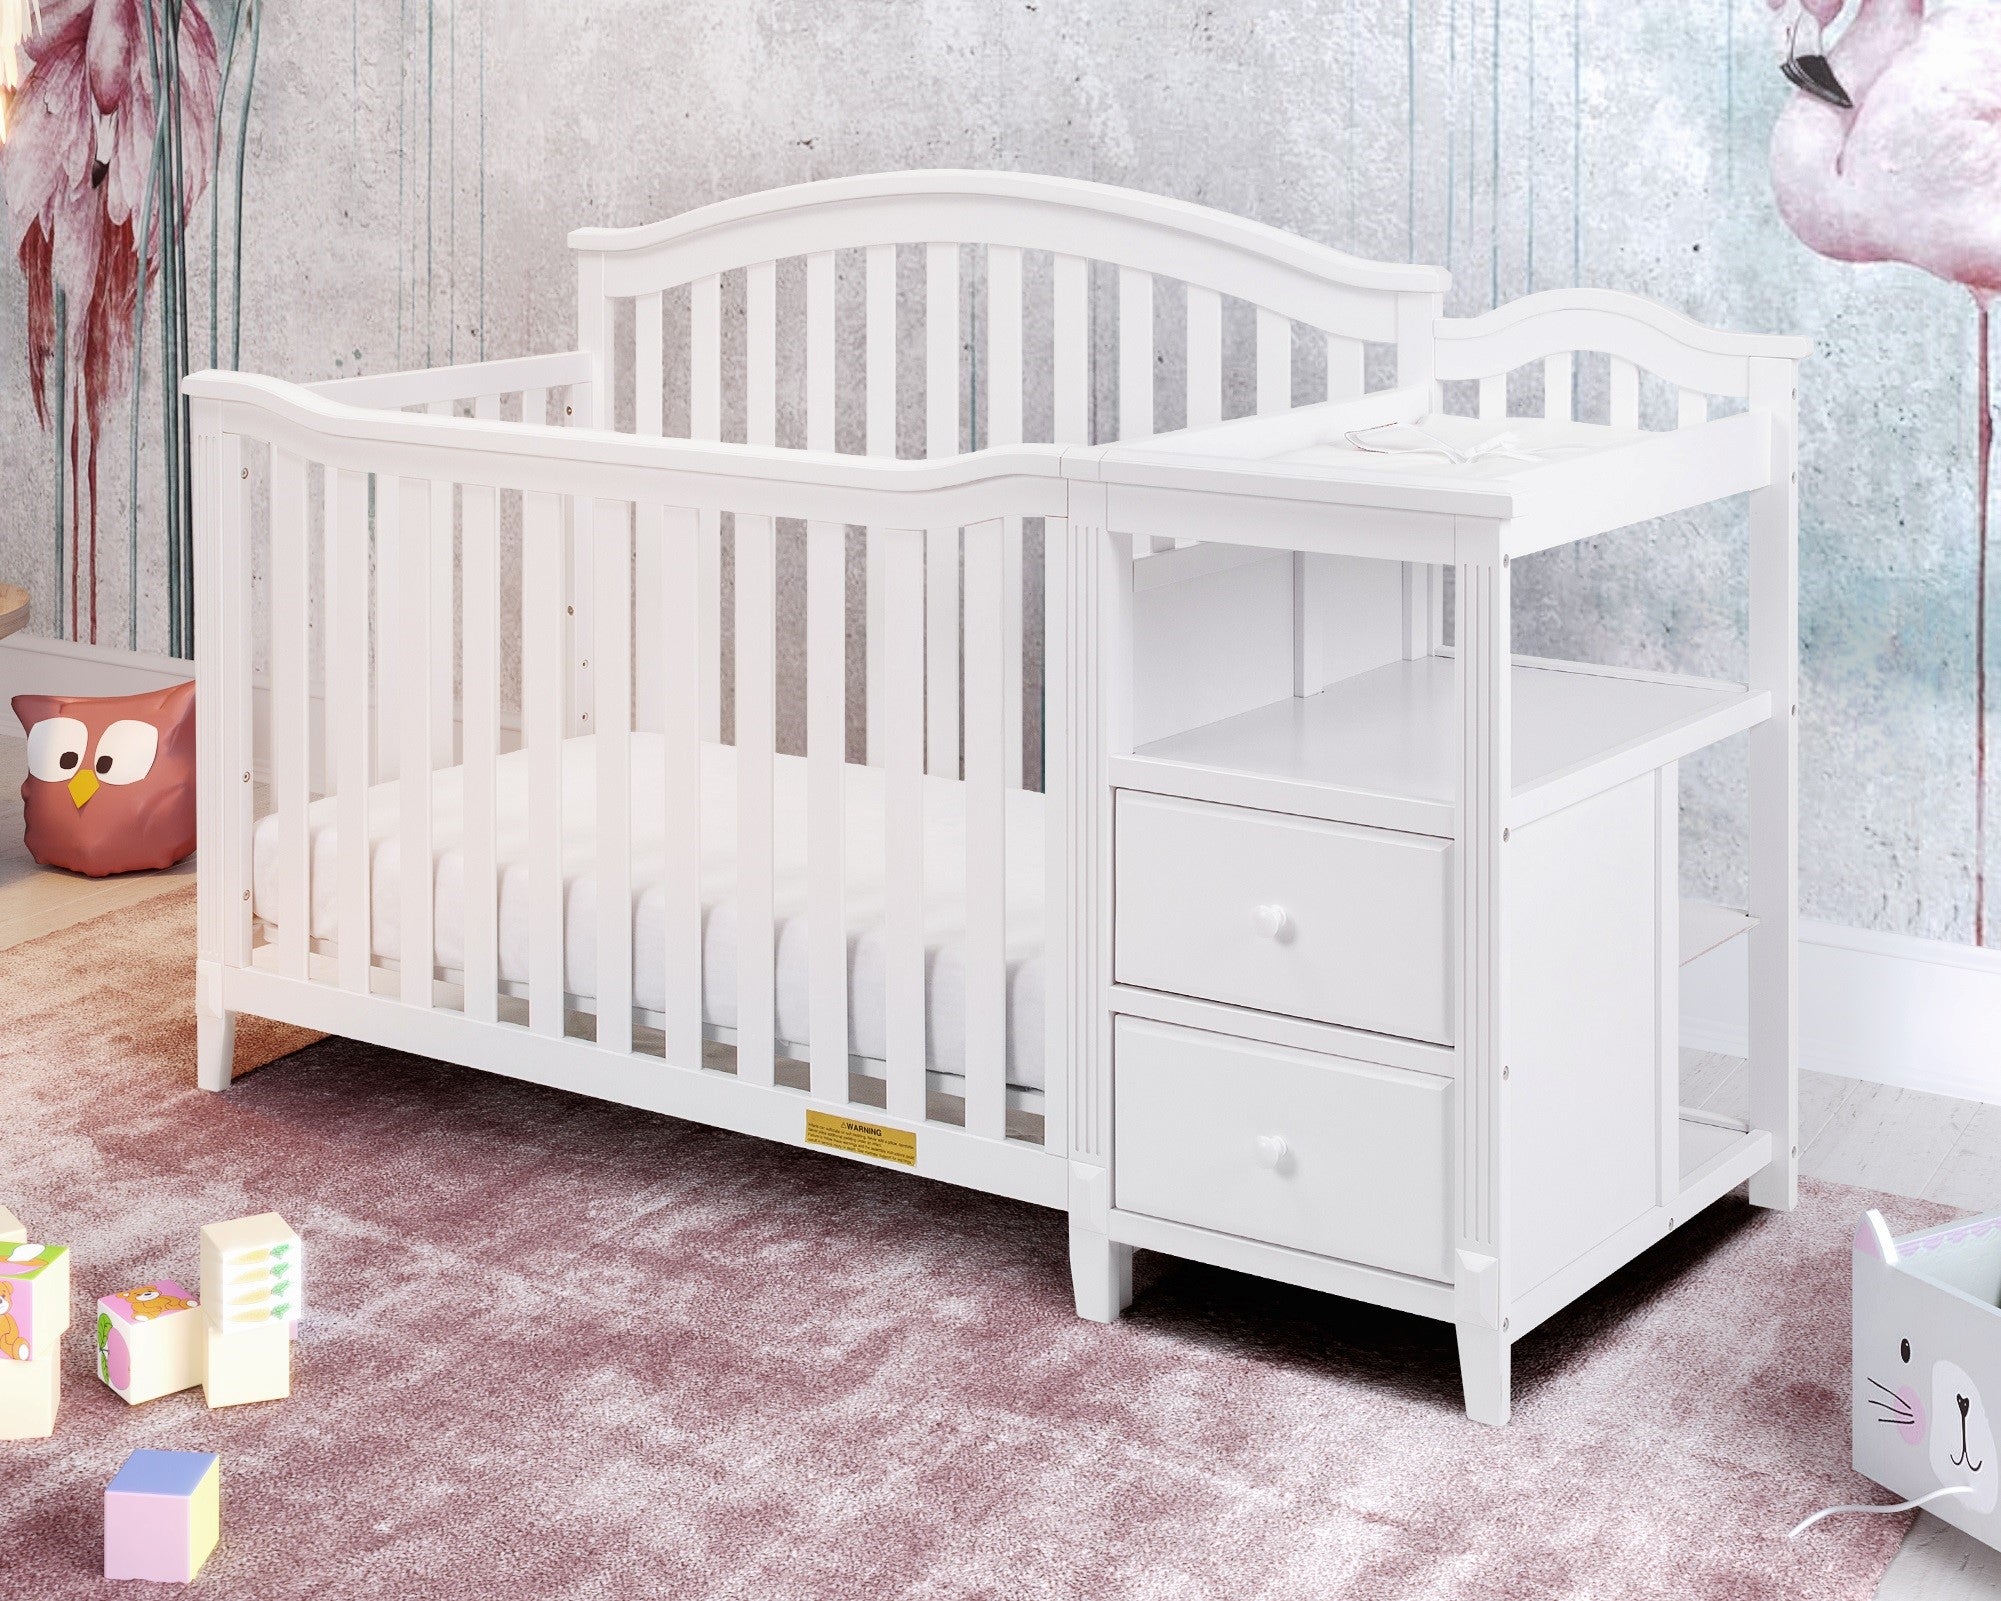 Athena AFG Baby Furniture Kali 4-in-1 Crib with Changer and Storage in White